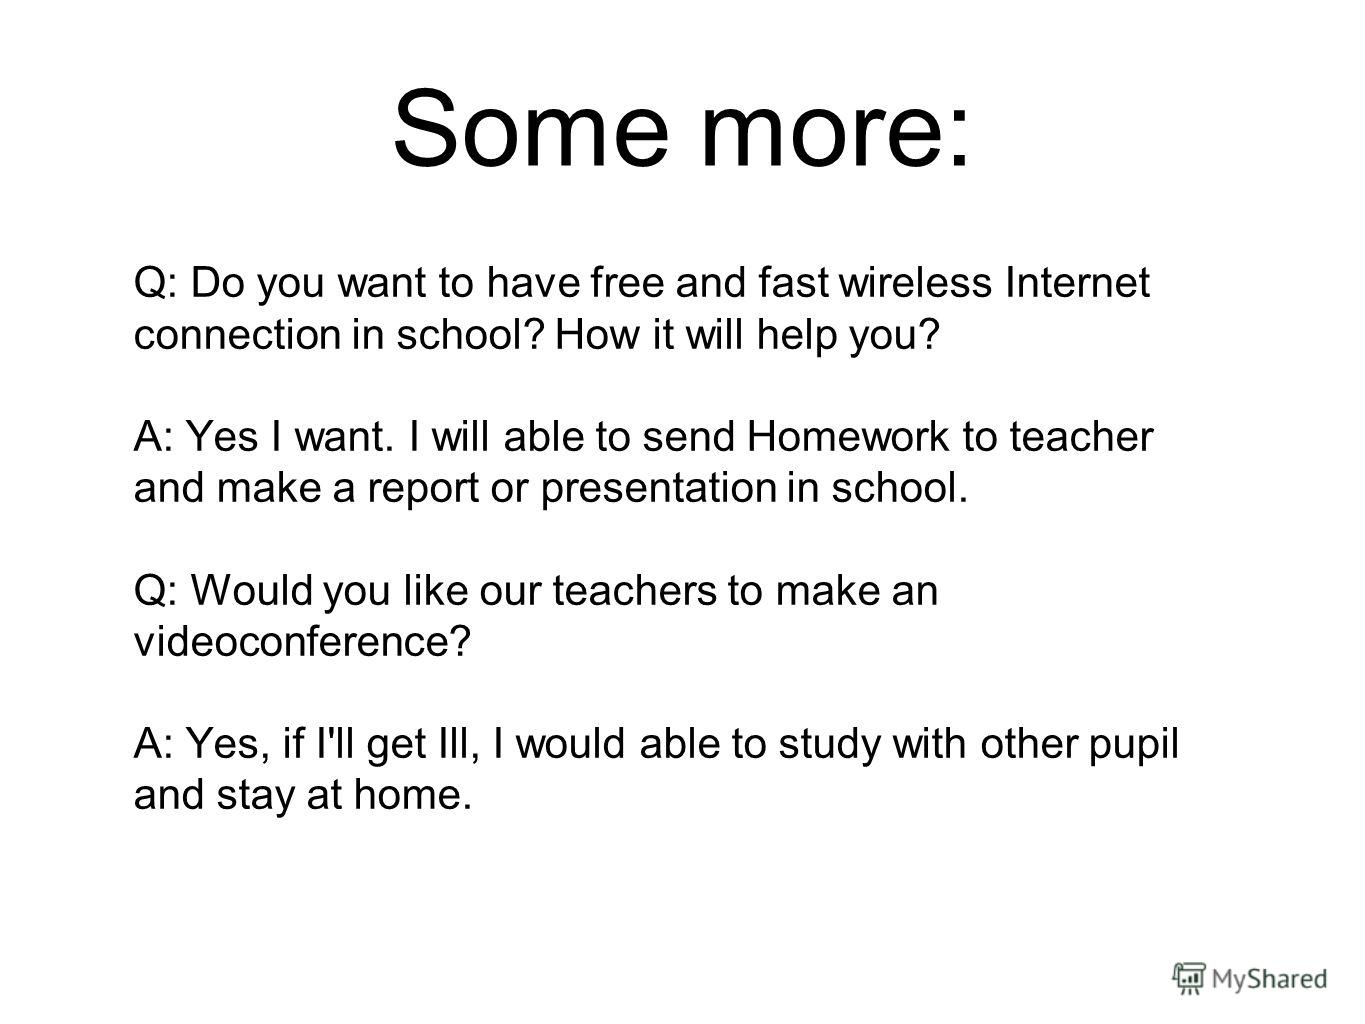 Some more: Q: Do you want to have free and fast wireless Internet connection in school? How it will help you? A: Yes I want. I will able to send Homework to teacher and make a report or presentation in school. Q: Would you like our teachers to make a